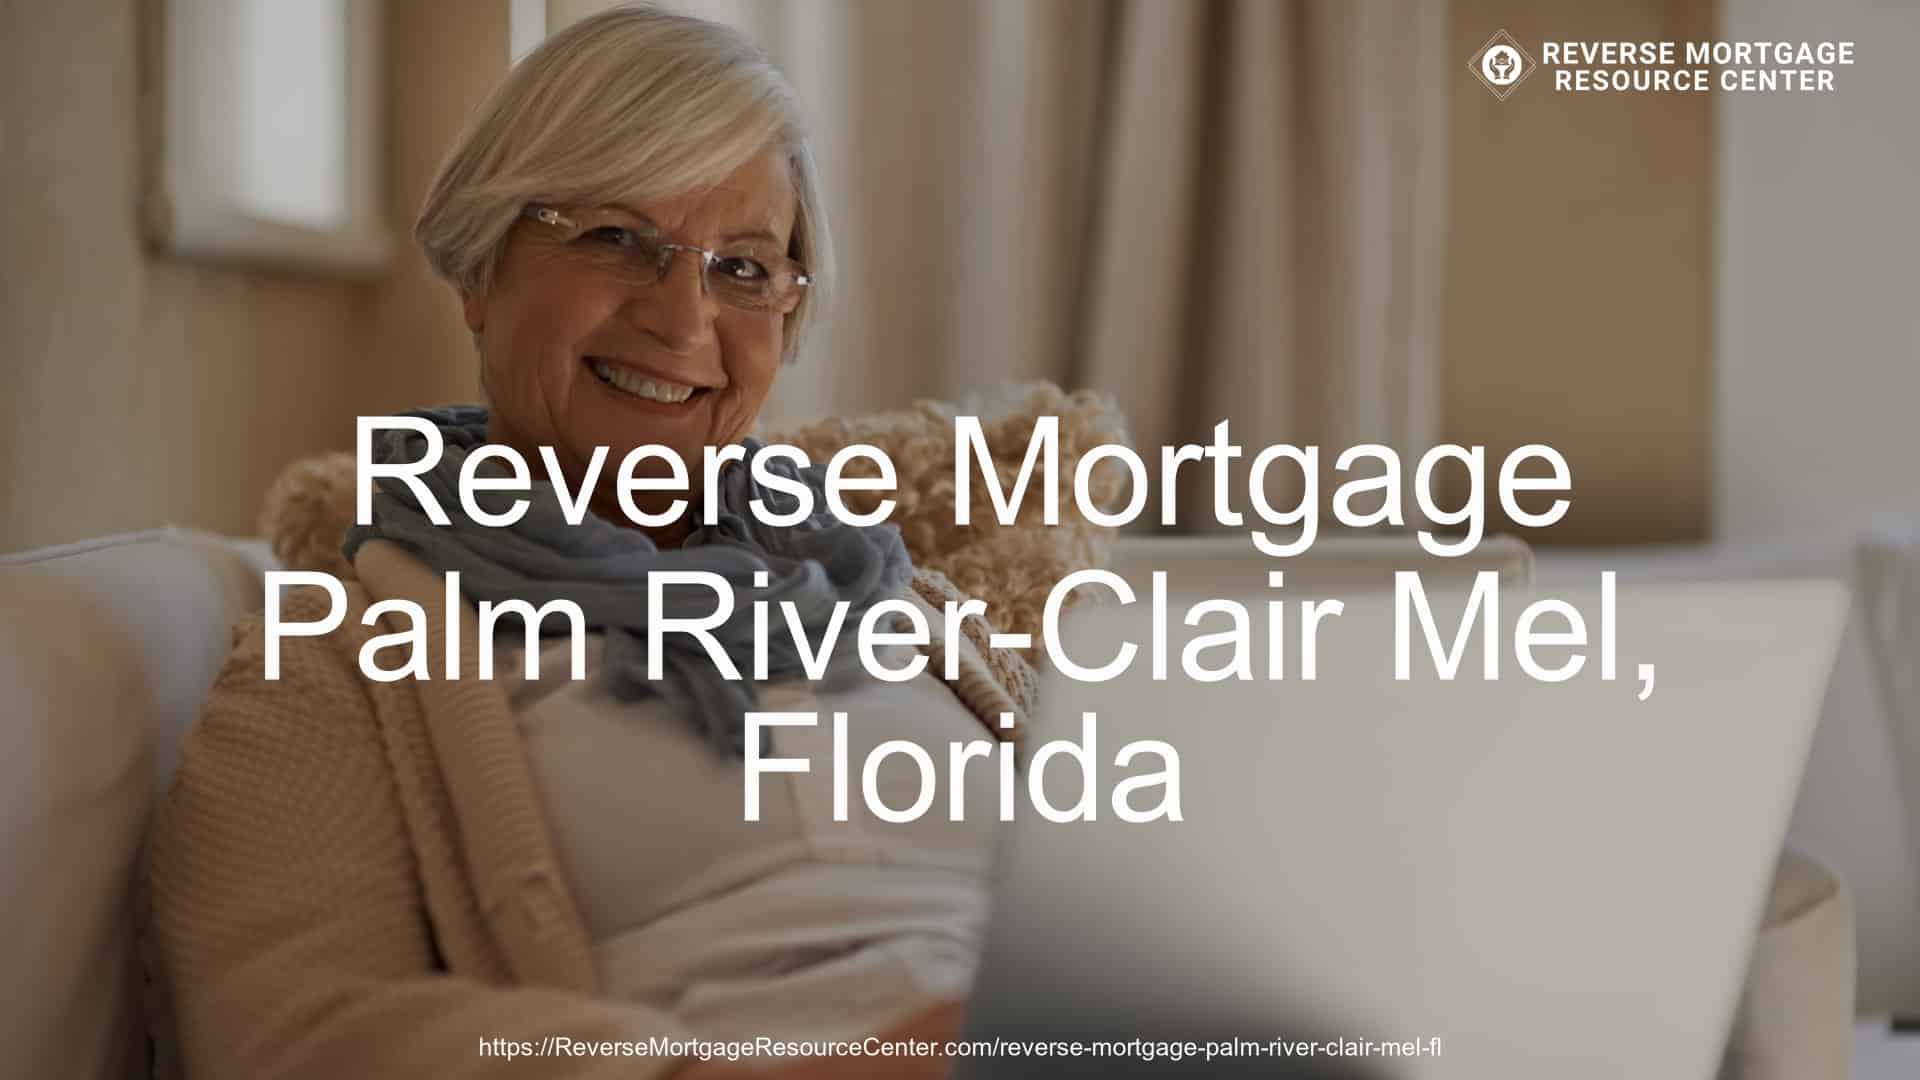 Reverse Mortgage in Palm River-Clair Mel, FL